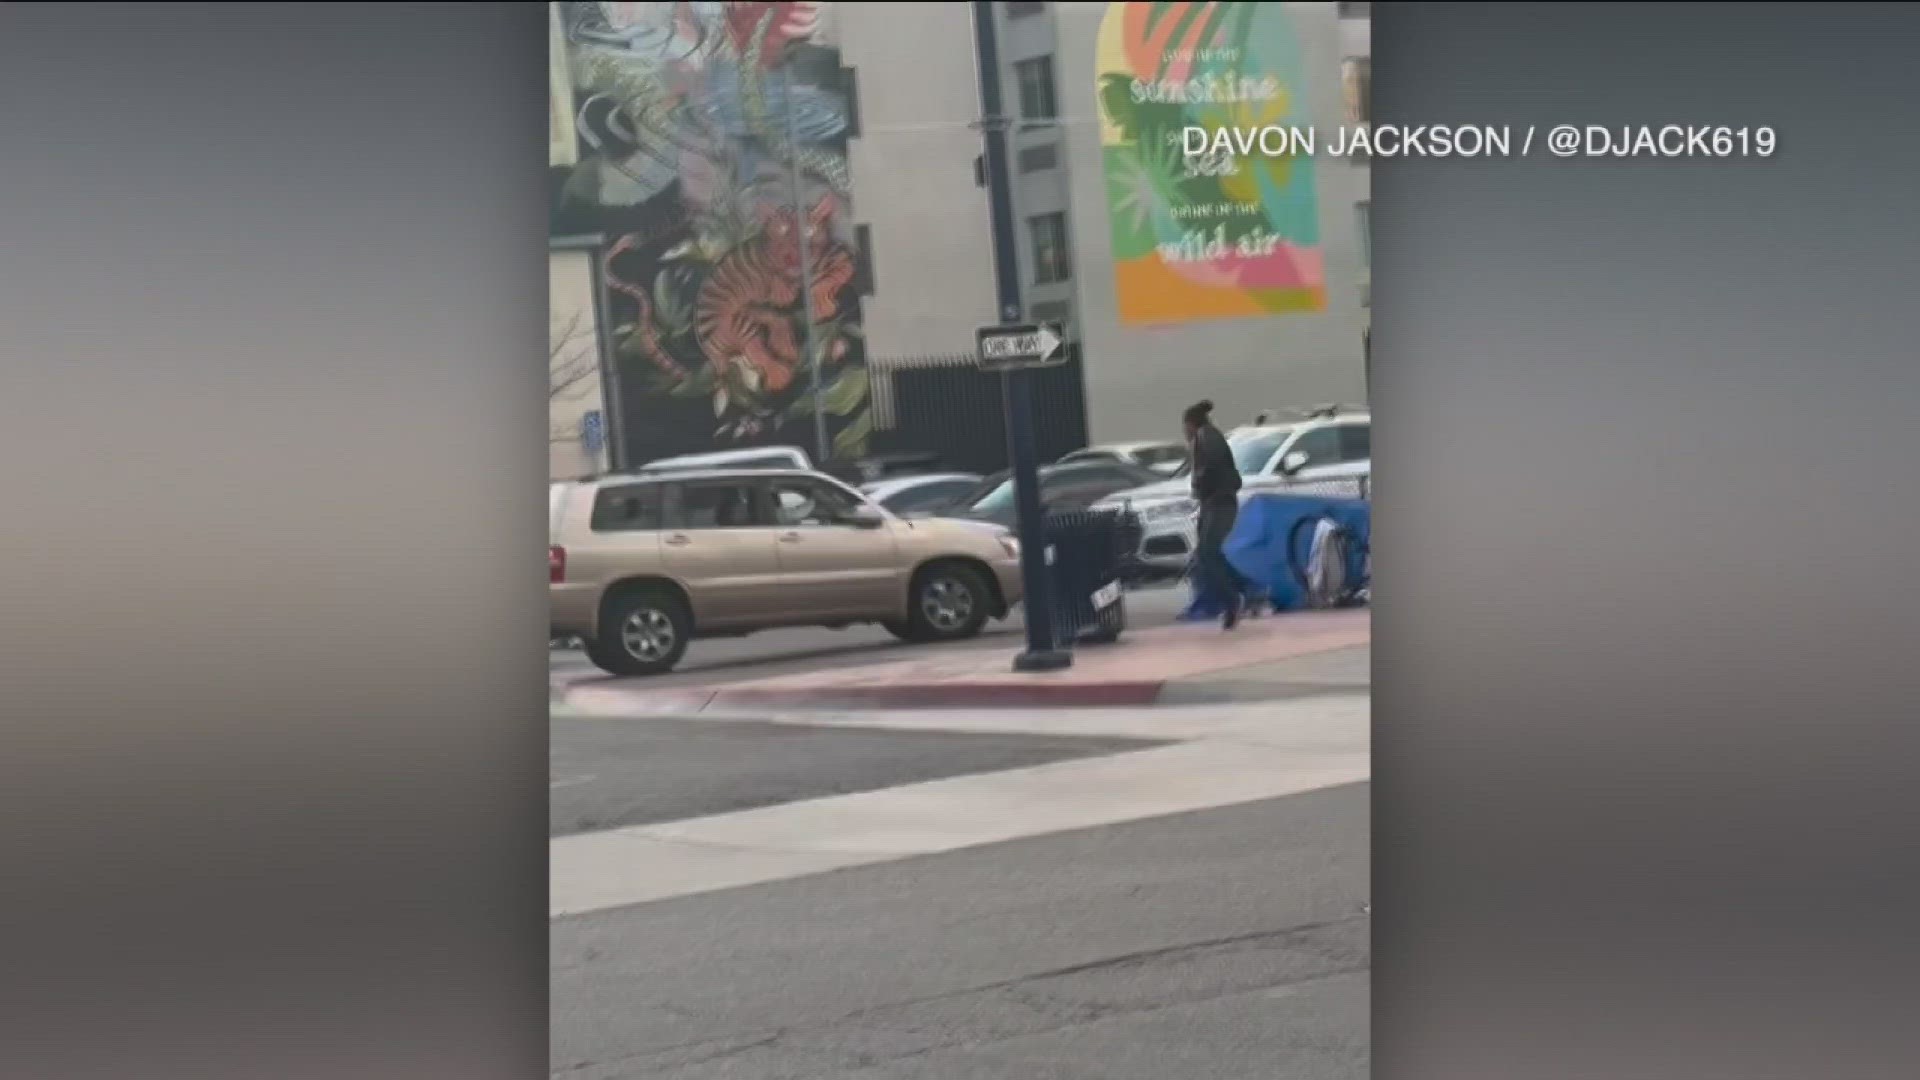 Video shared with CBS 8 showed a brown SUV driving erratically onto the sidewalk where a bat-wielding man was standing.